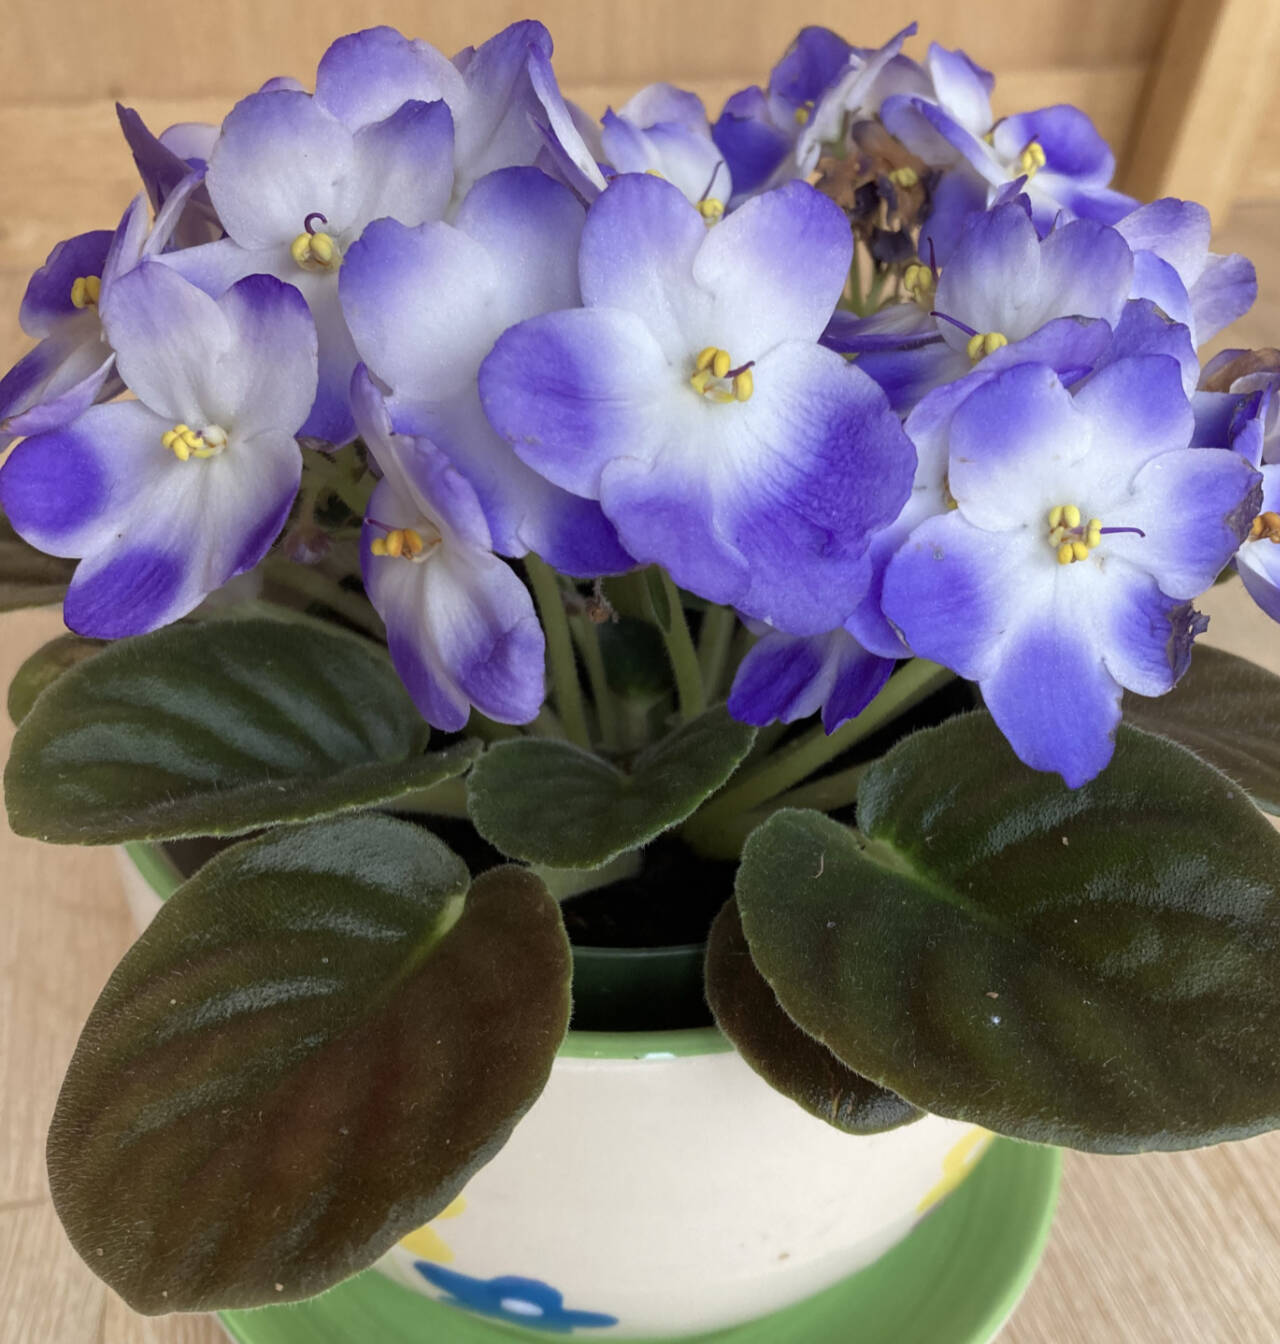 Photo by Jeanette Stehr-Green
African violets need 10 to 14 hours of light each day and at least eight hours of darkness to bloom.